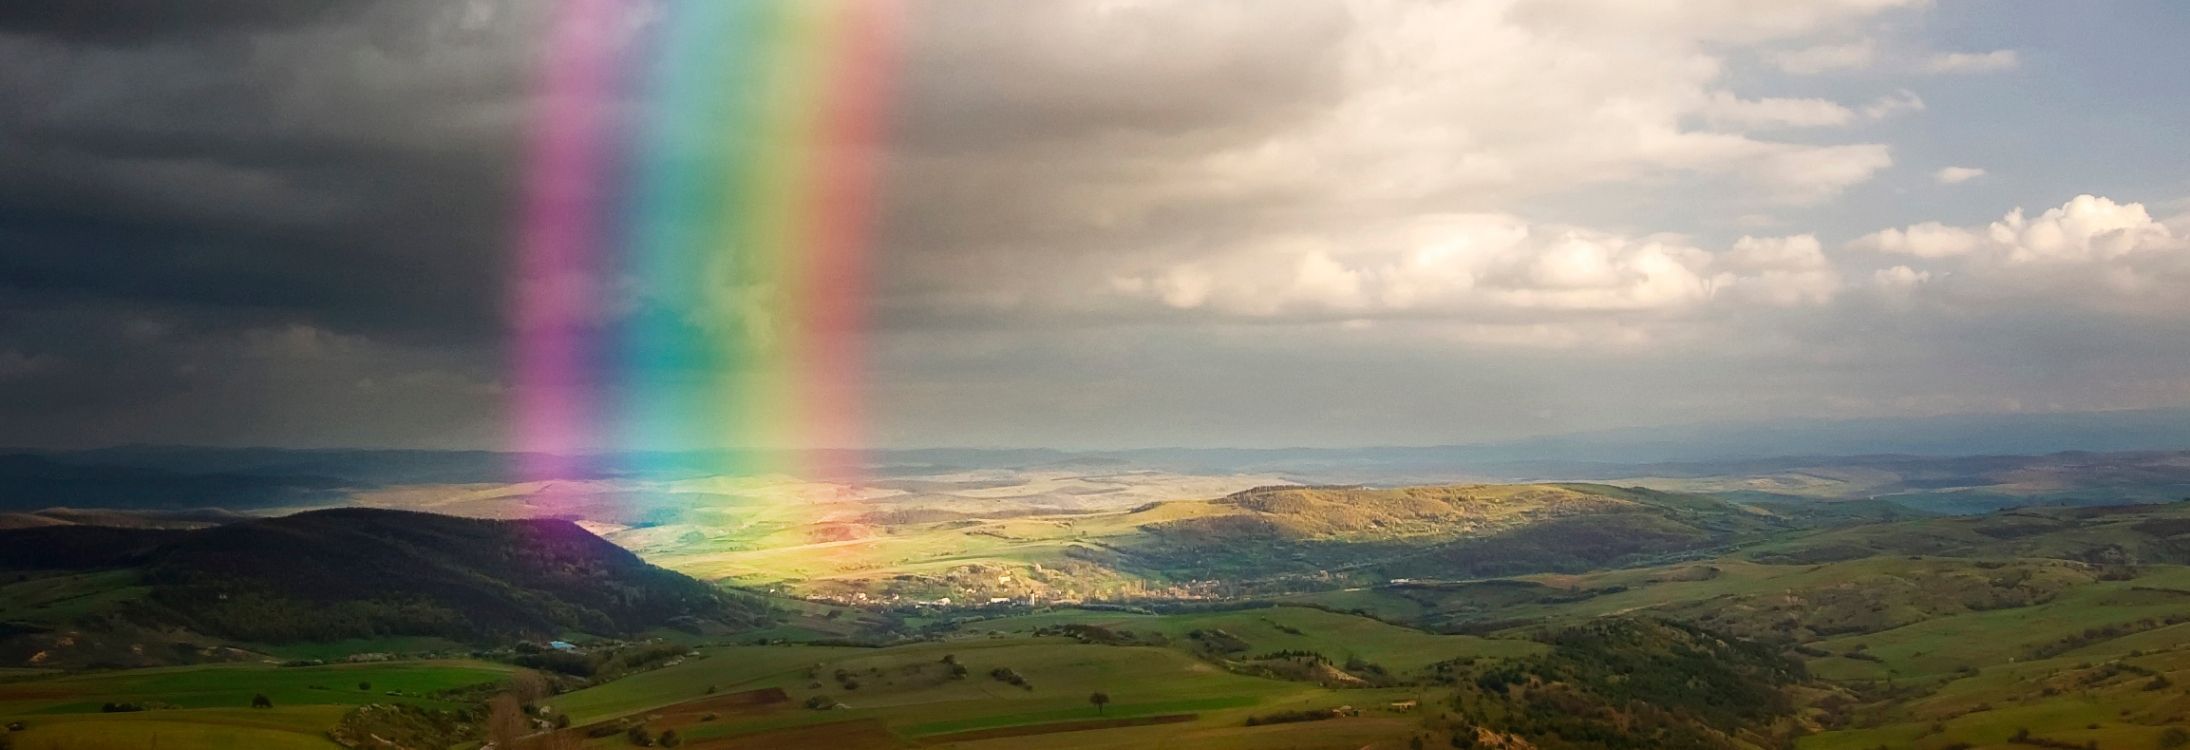 Top 5 Places To See Rainbows In The World - Musafir